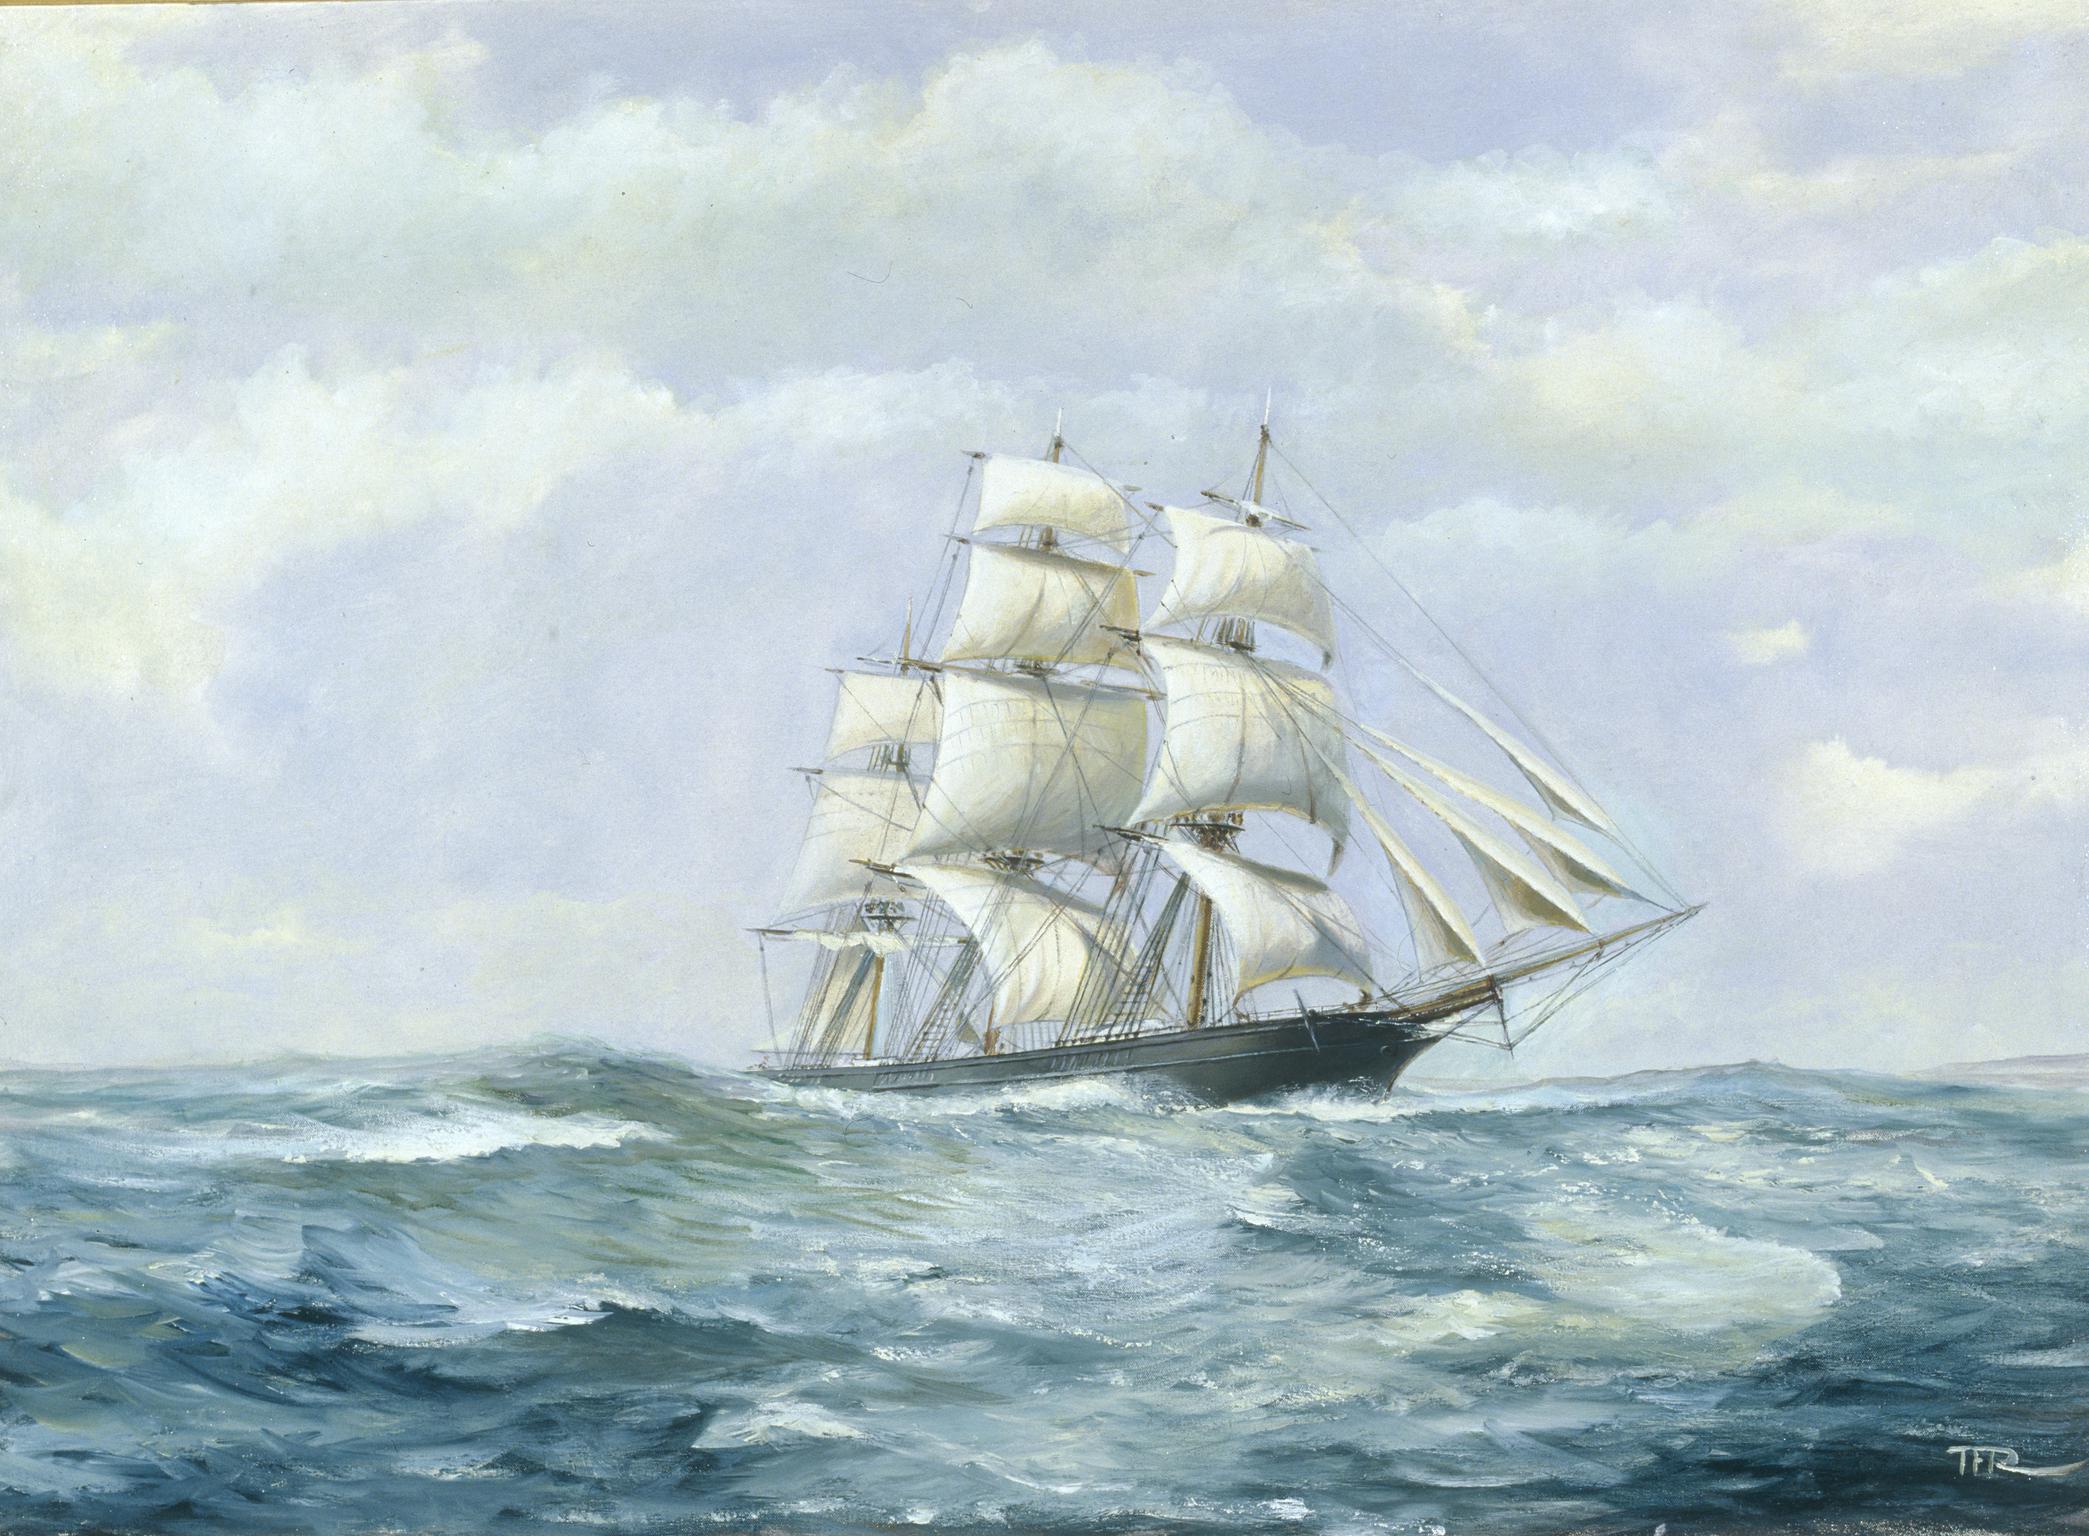 CINDERELLA (In Bay of Biscay) (painting)